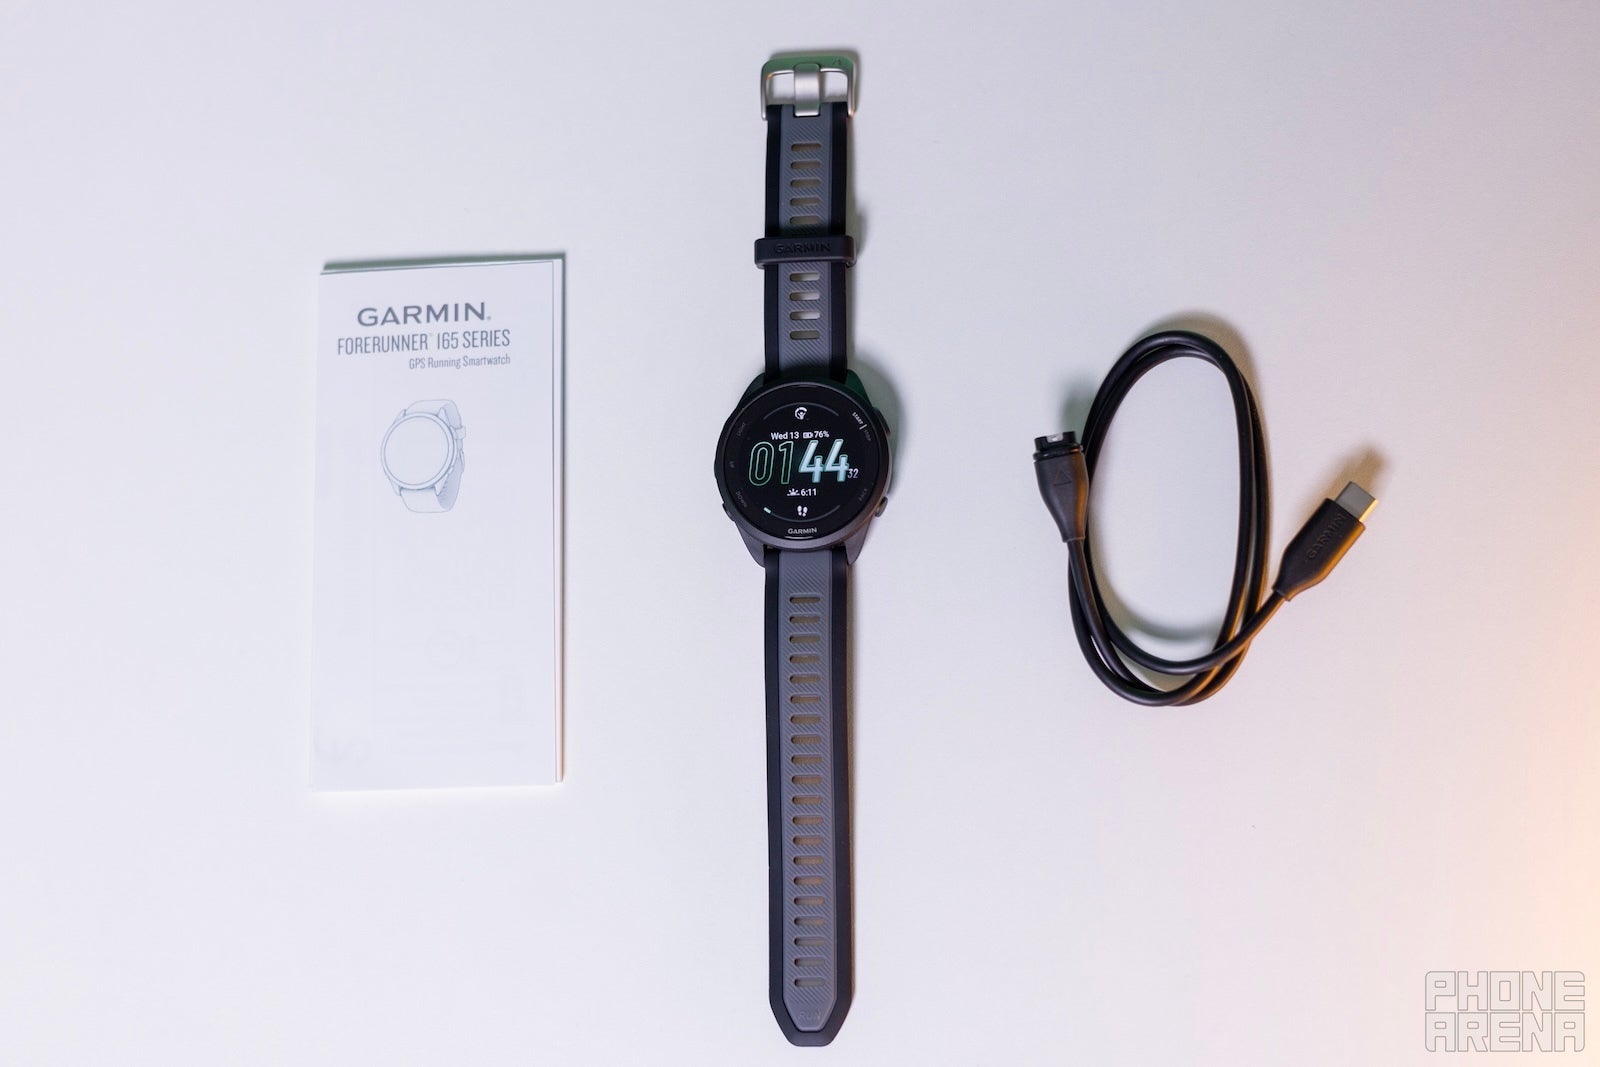 You will only find the watch, a charging cable and a user manual inside the box (Image by PhoneArena) - Garmin Forerunner 165 Review: The new default Garmin sports watch